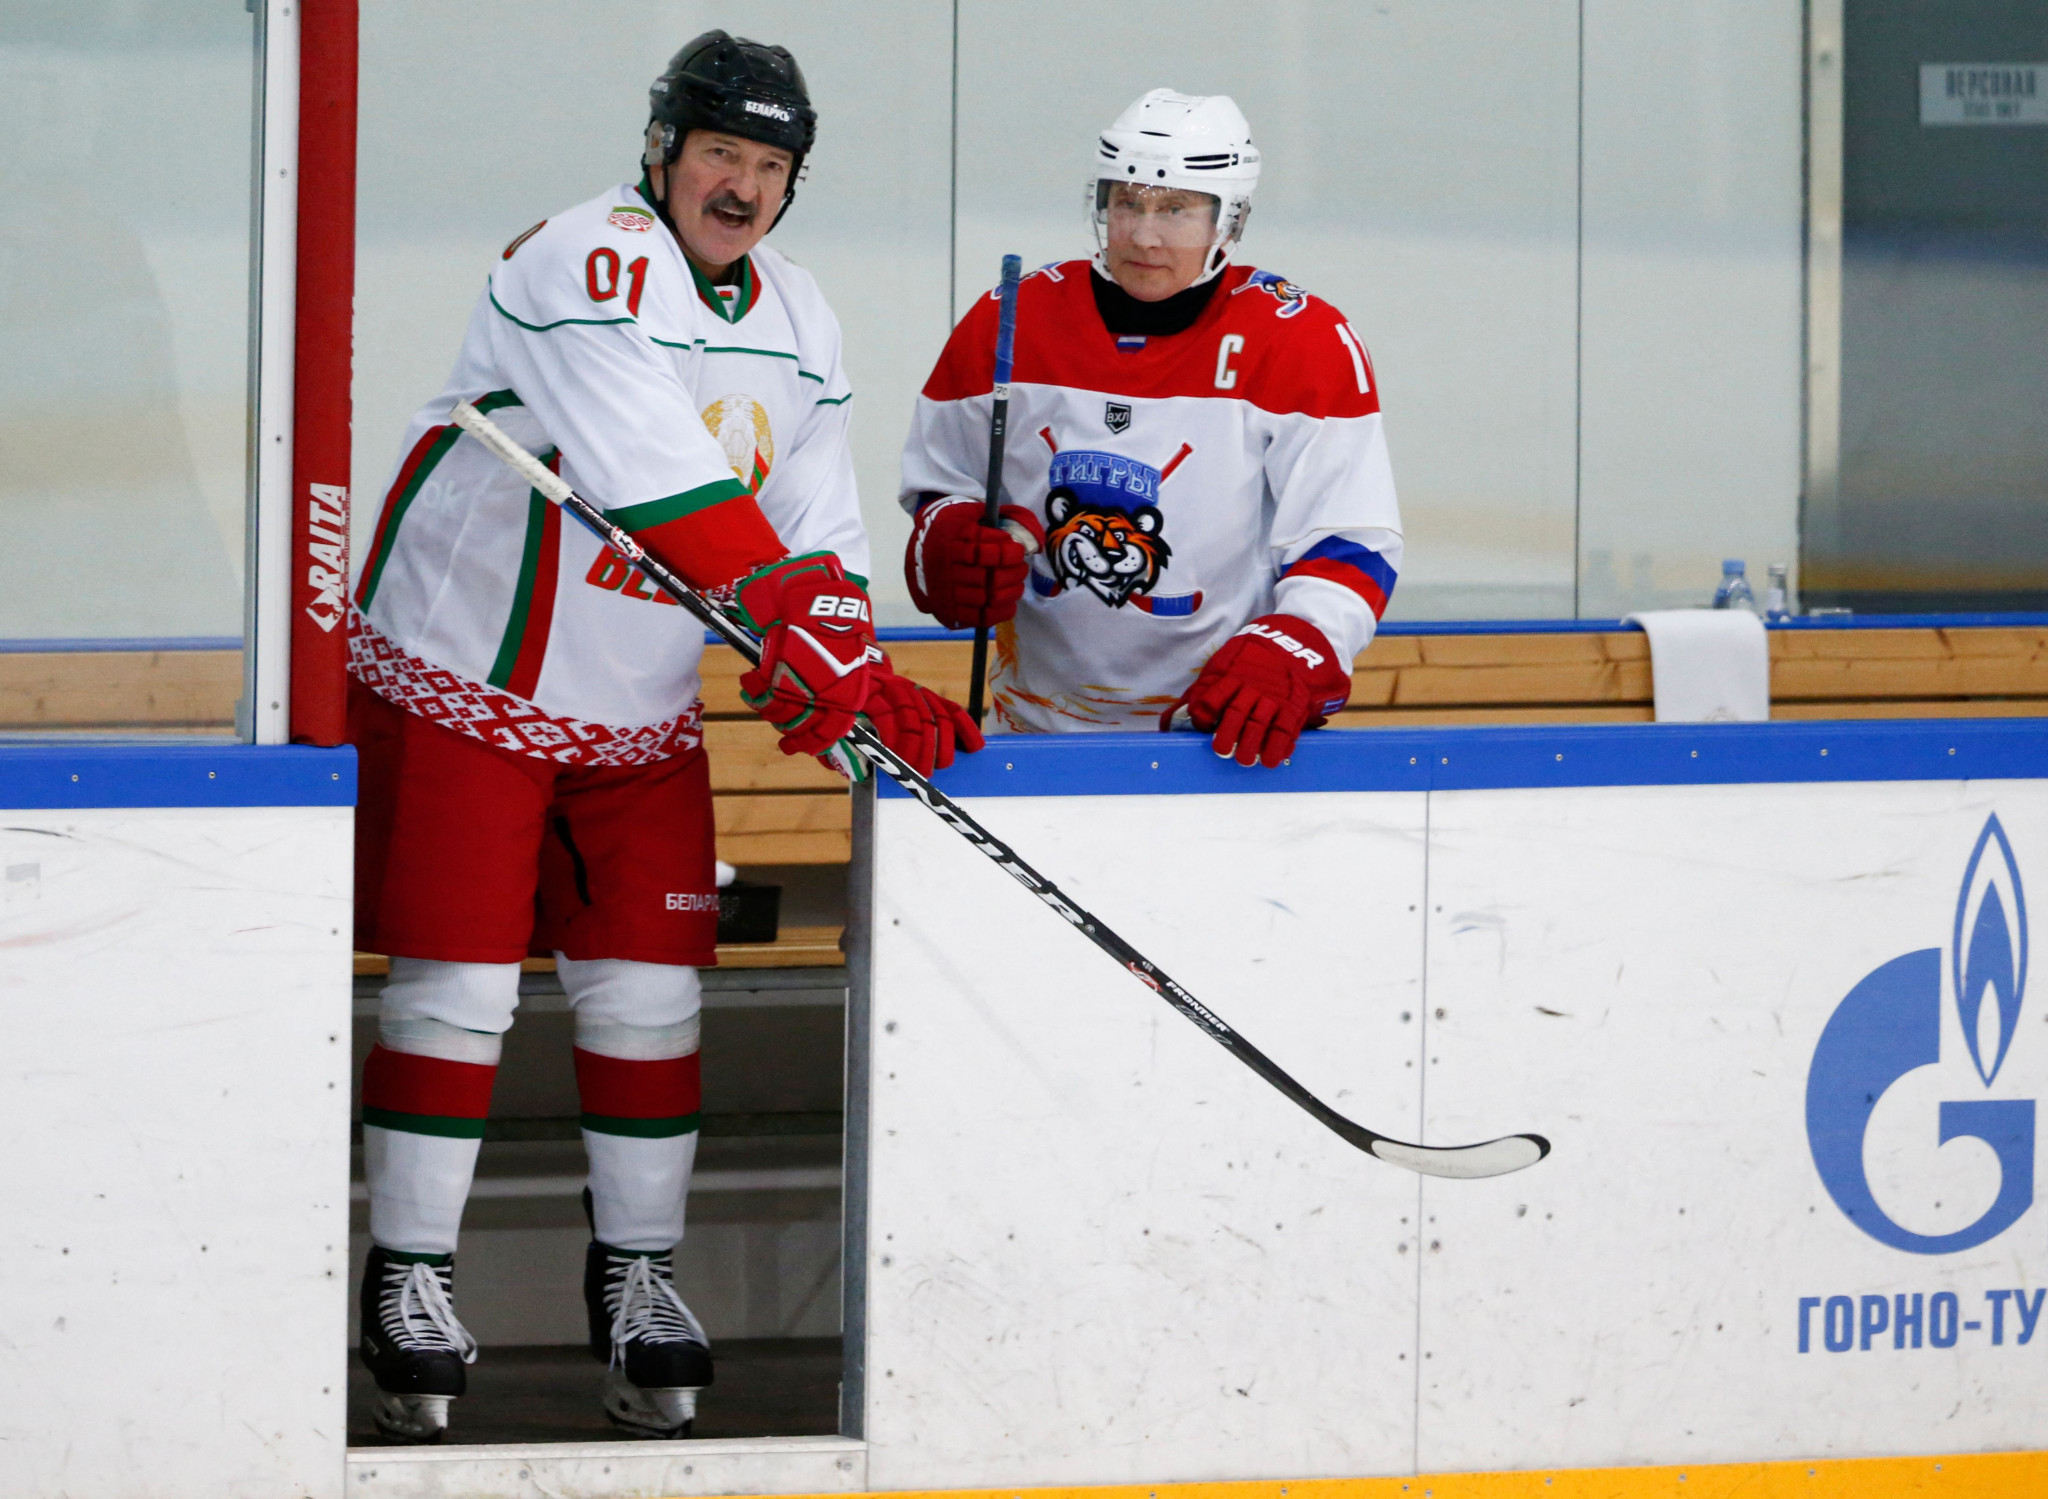 Ice hockey is a hobby of Belarusian President Alexander Lukashenko, left, and Russian President Vladimir Putin, right ©Getty Images